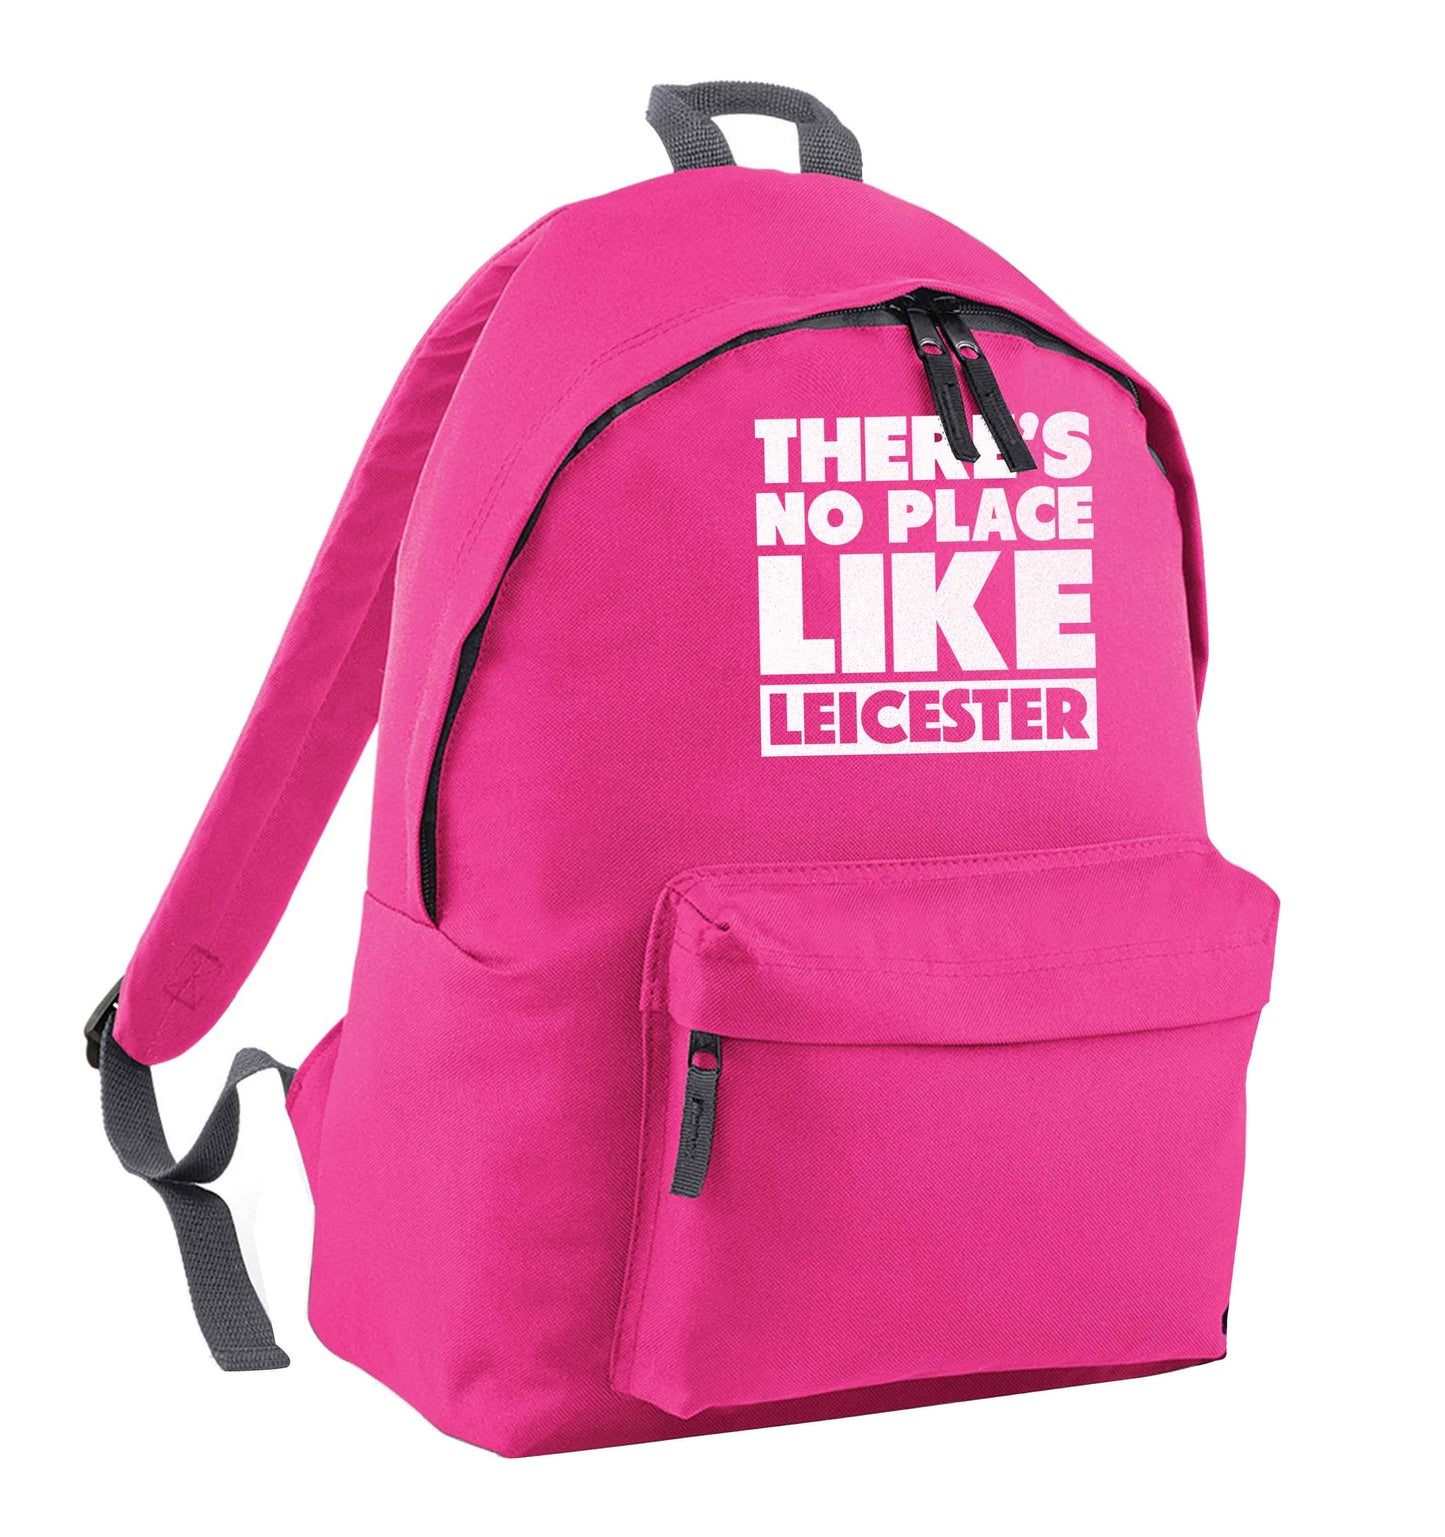 There's no place like Leicester pink adults backpack